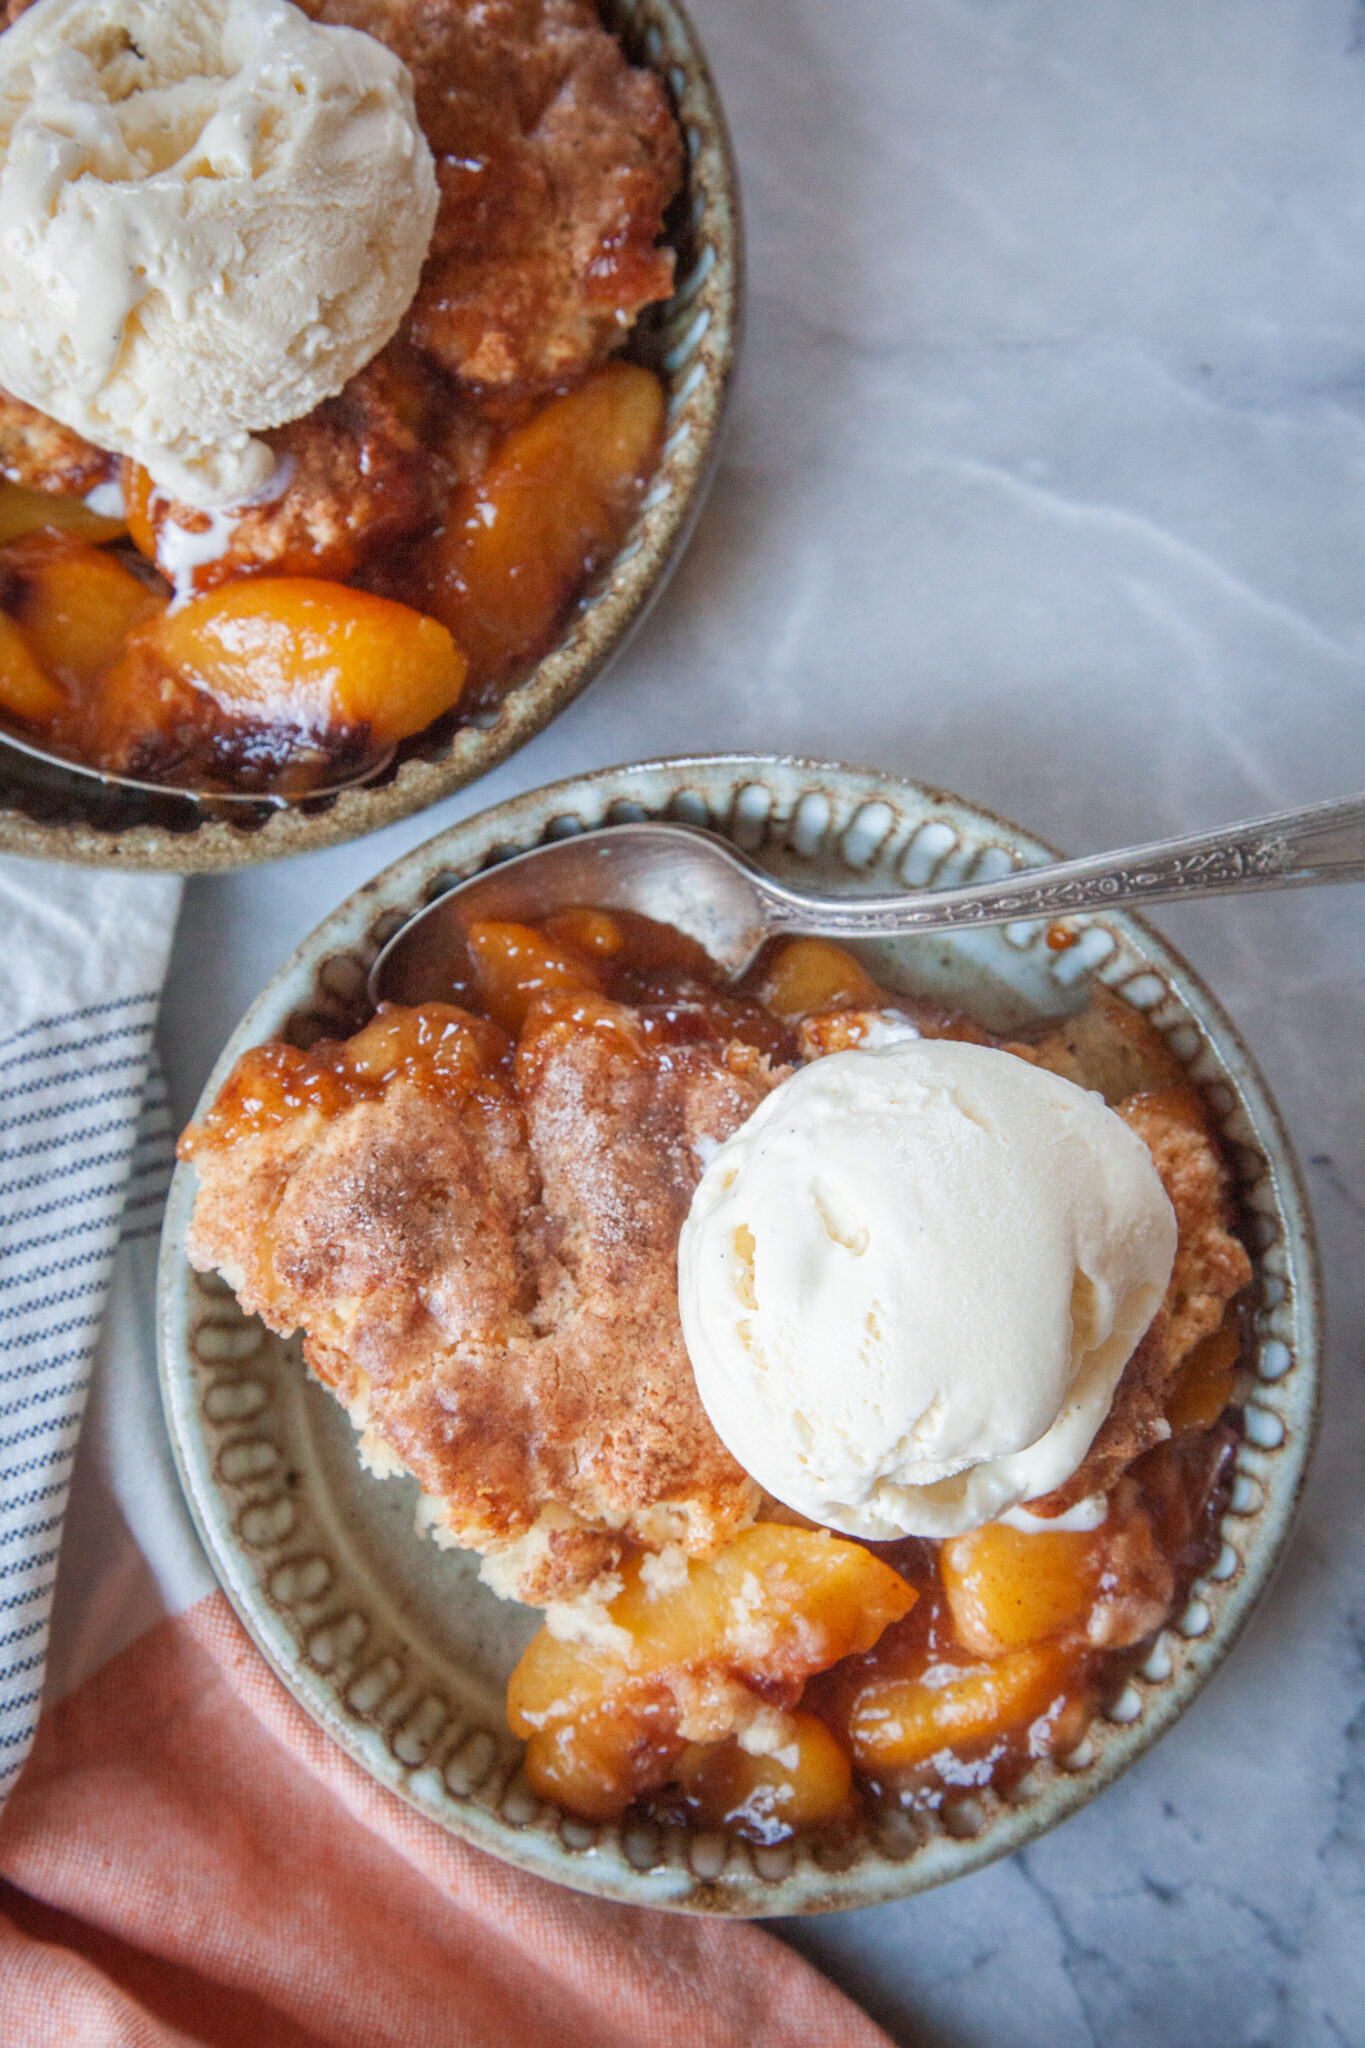 Two shallow bowls of peach cobbler with scoops of vanilla ice cream on top.